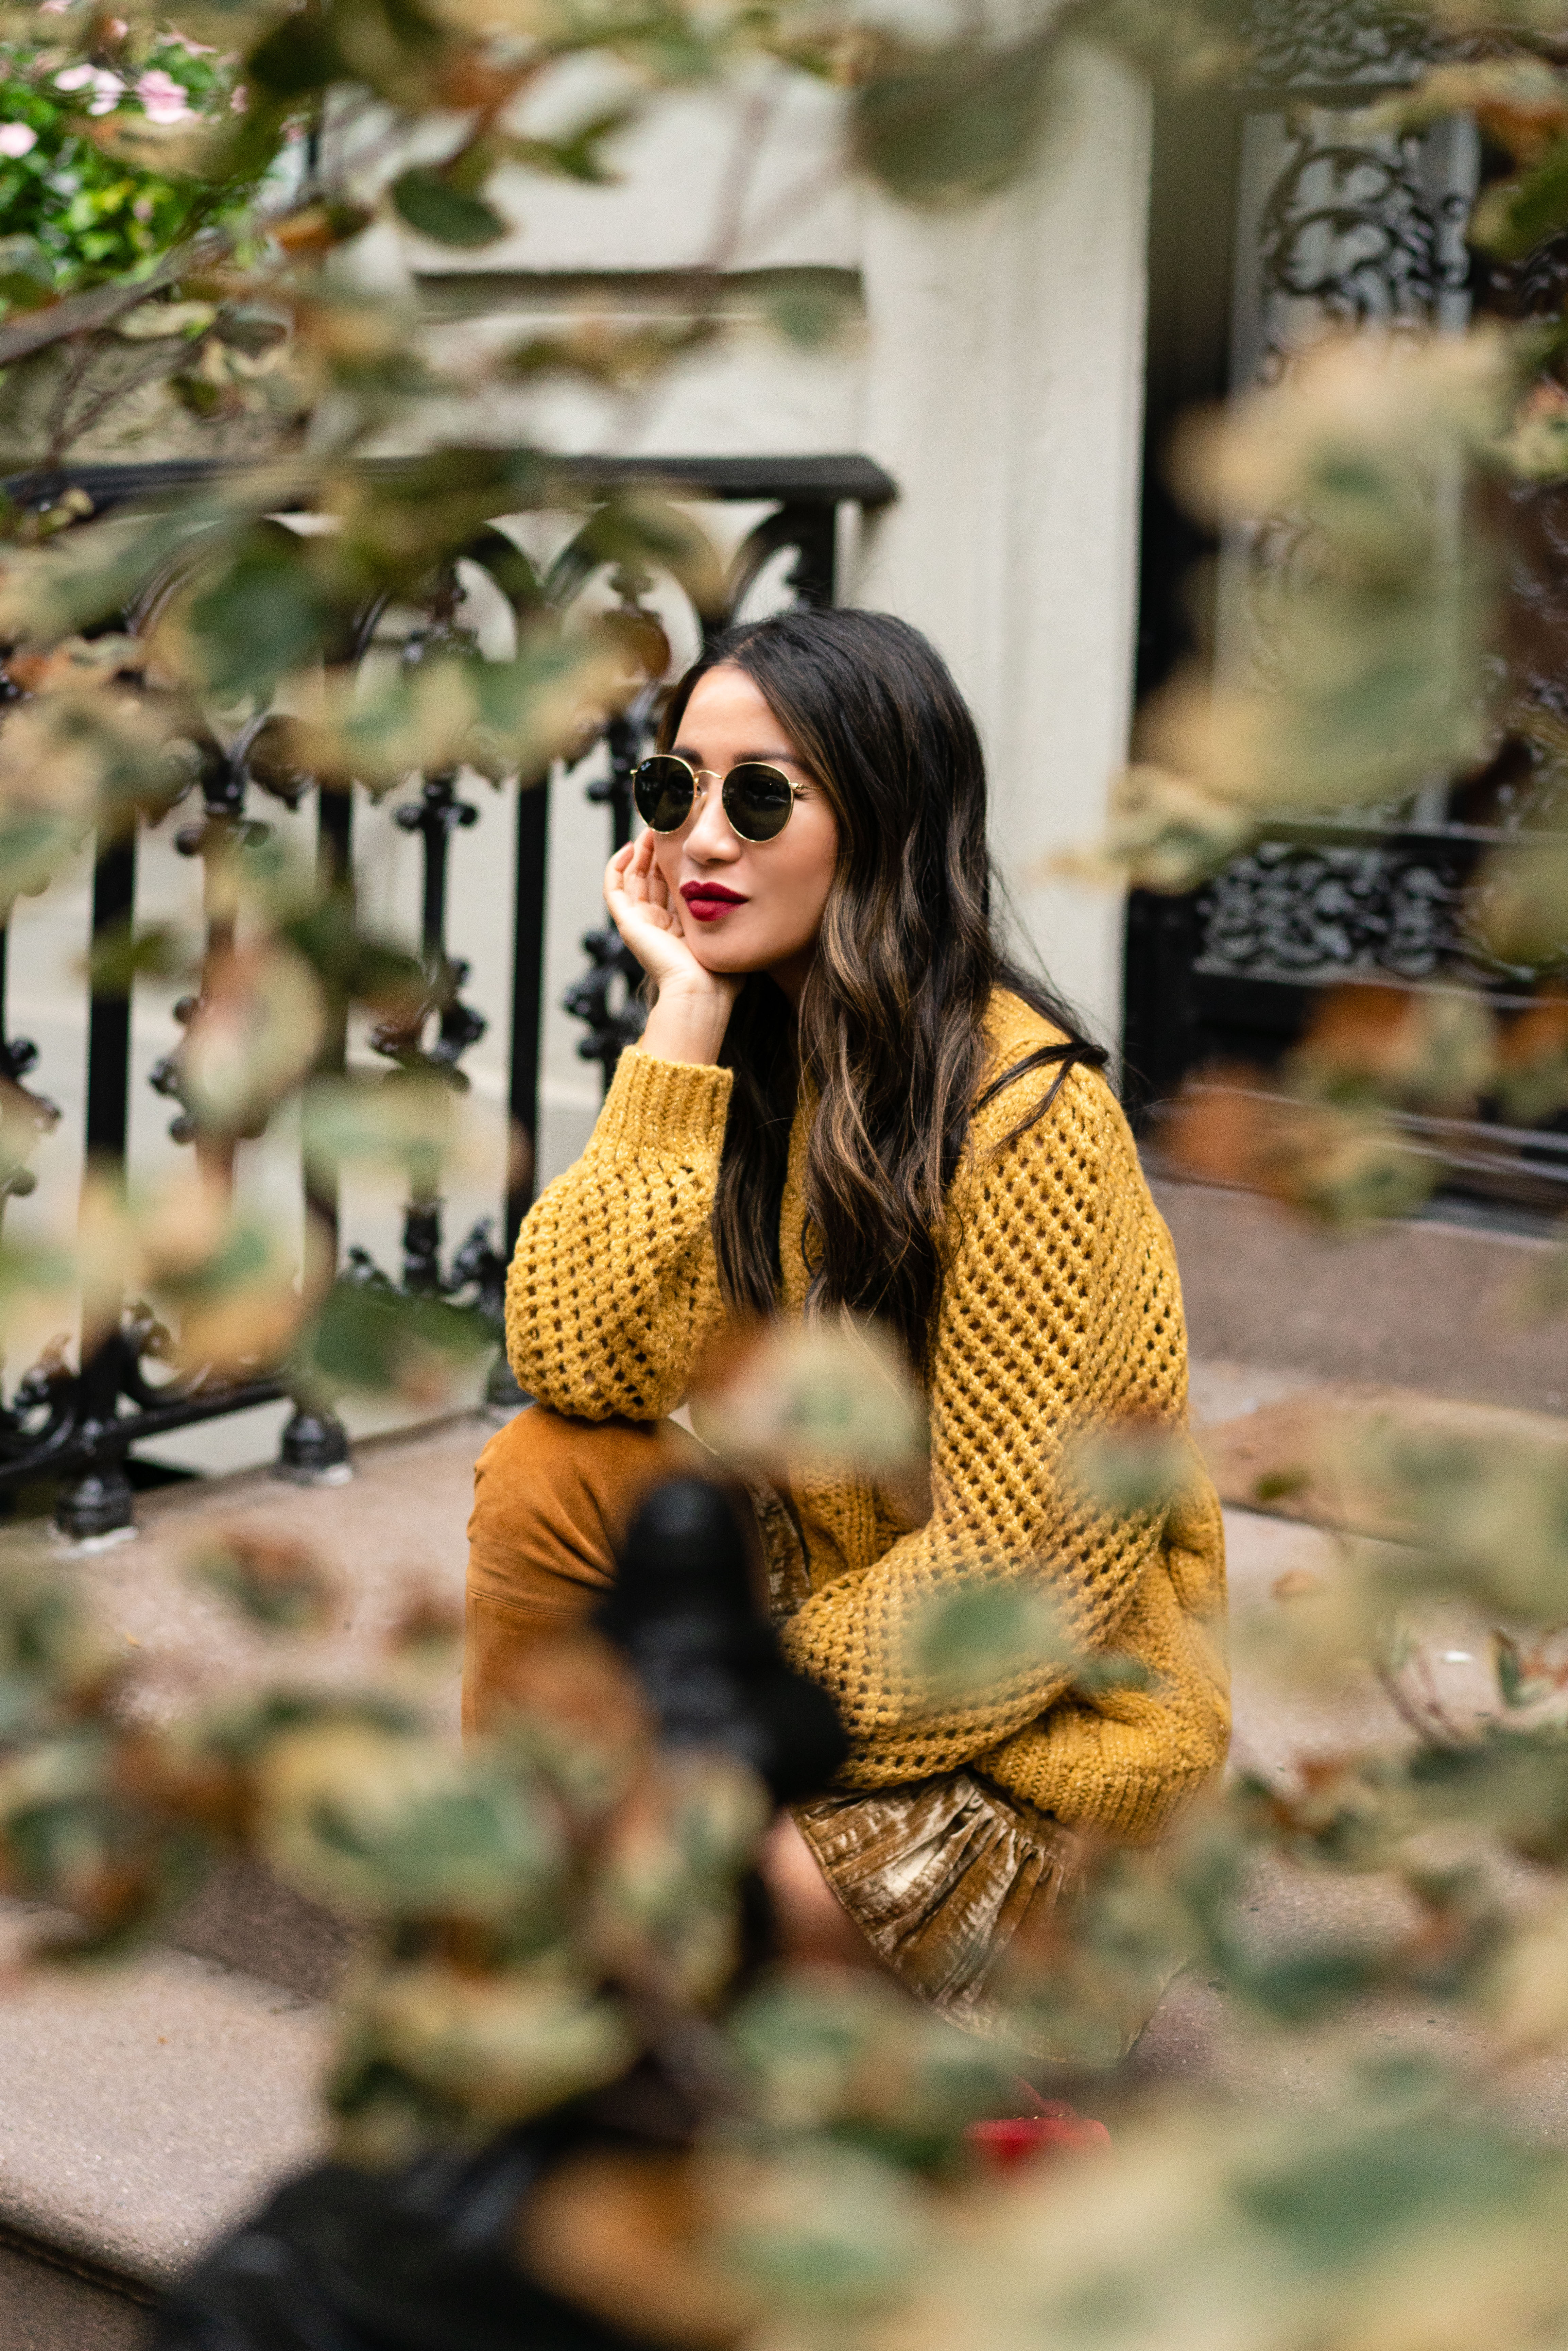 Wearing yellow sweater, yellow skirt, and red lipstick fall fashion outfit